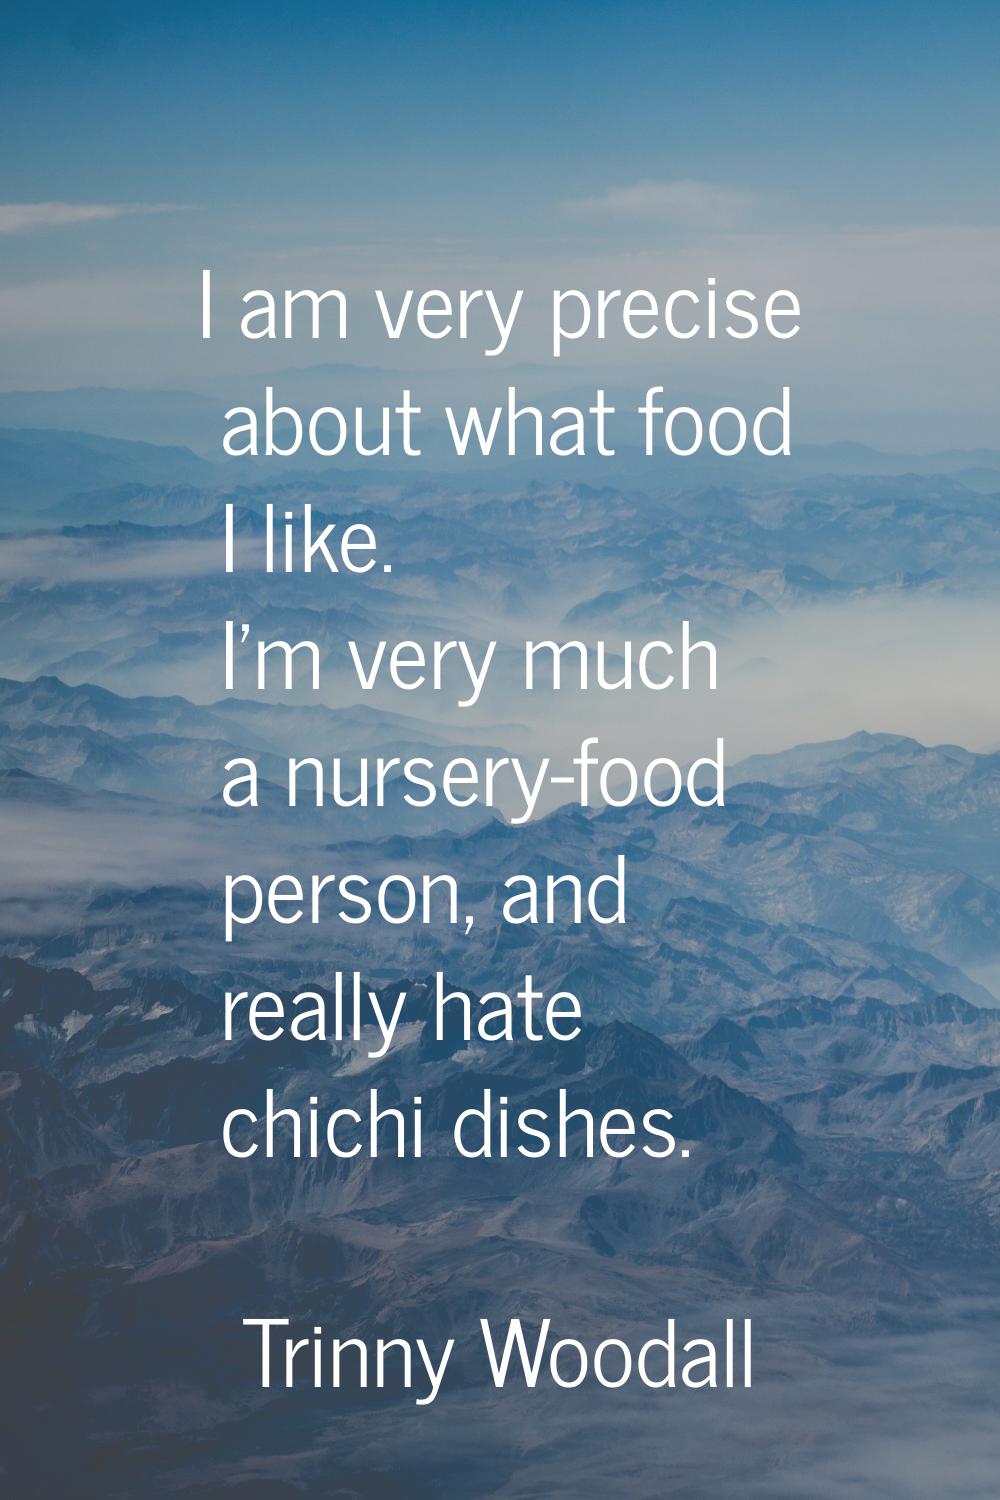 I am very precise about what food I like. I'm very much a nursery-food person, and really hate chic